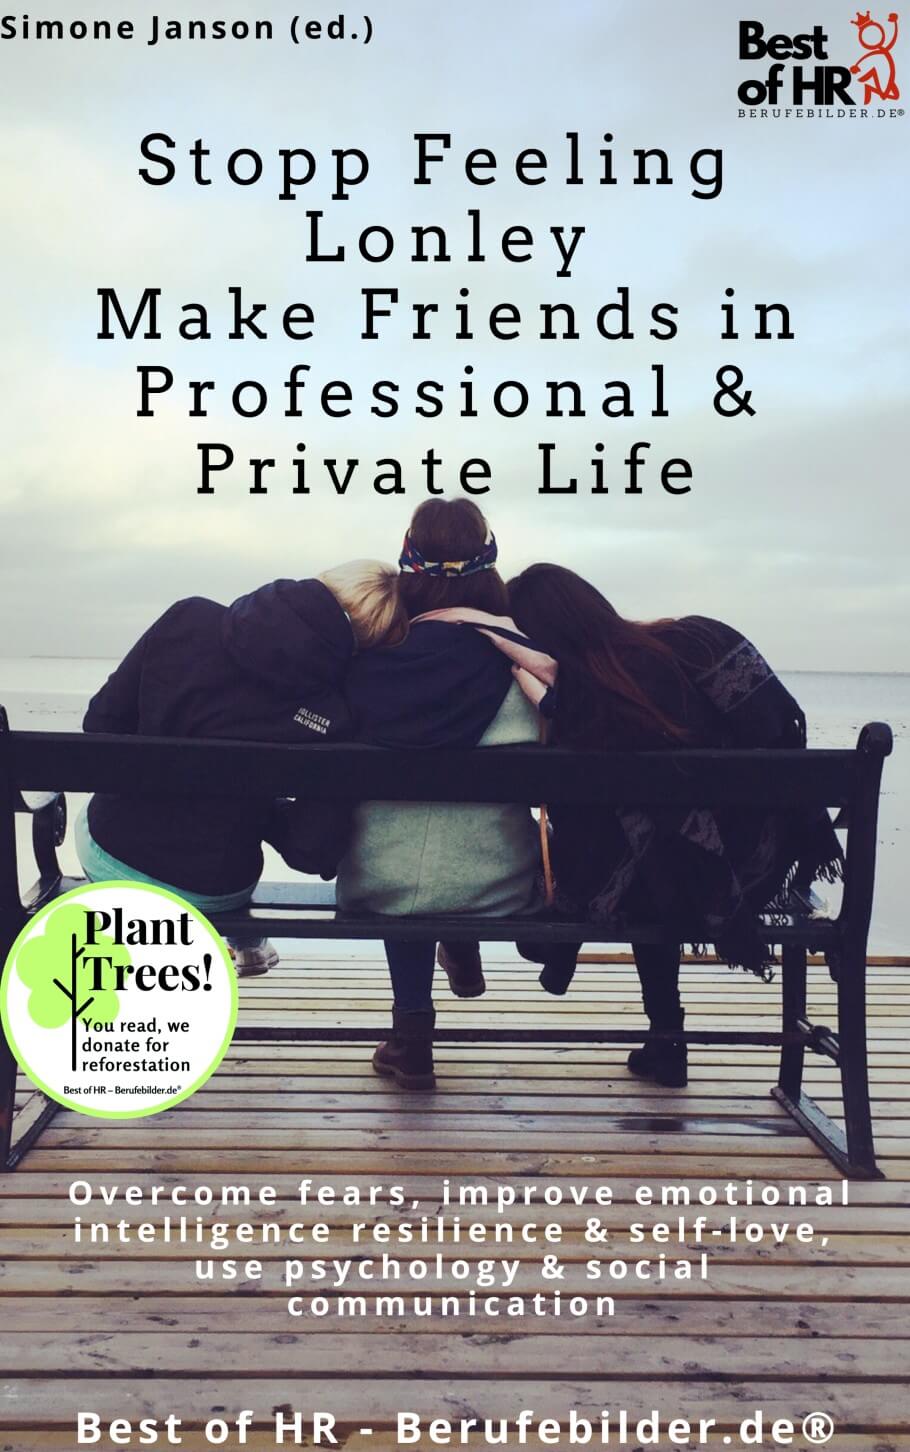 Stopp Feeling Lonley – Make Friends in Professional & Private Life (Engl. Version)